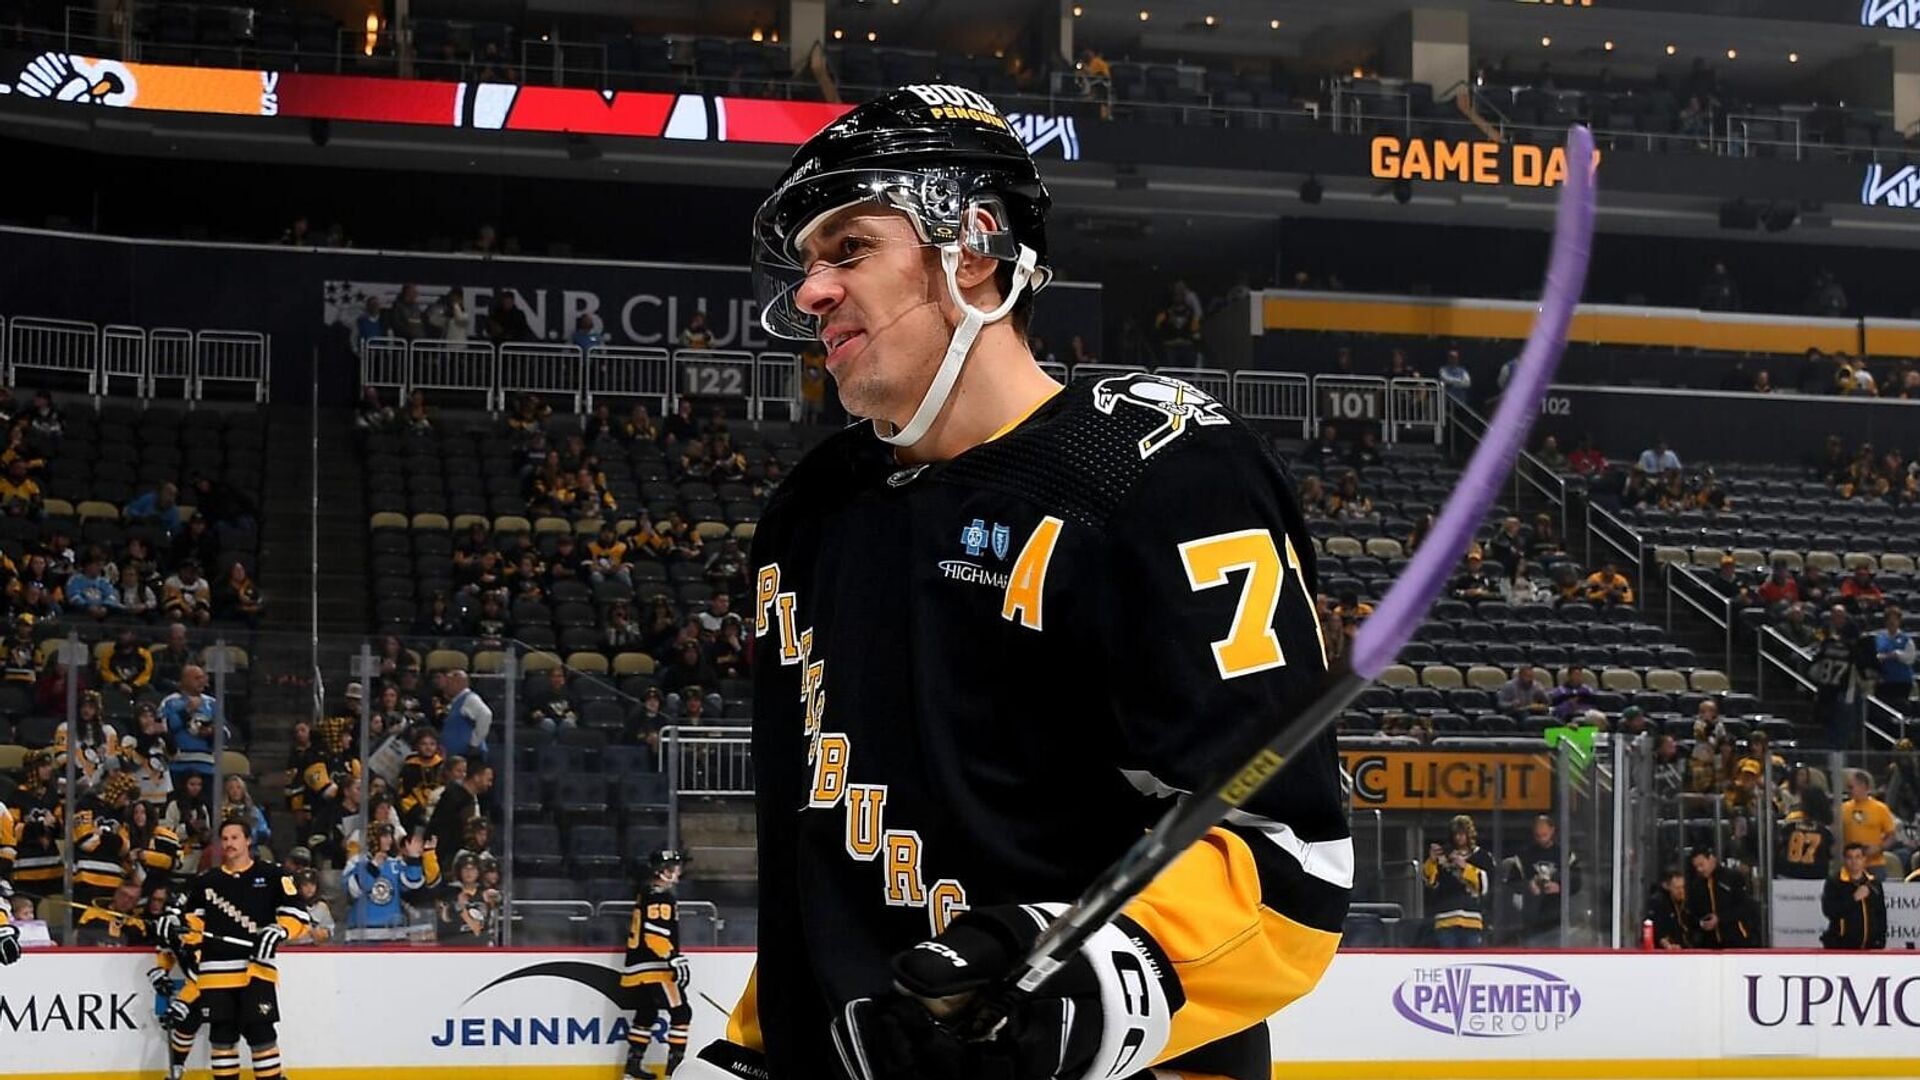 Malkin’s Pittsburgh suffered its second loss of the season against Philadelphia